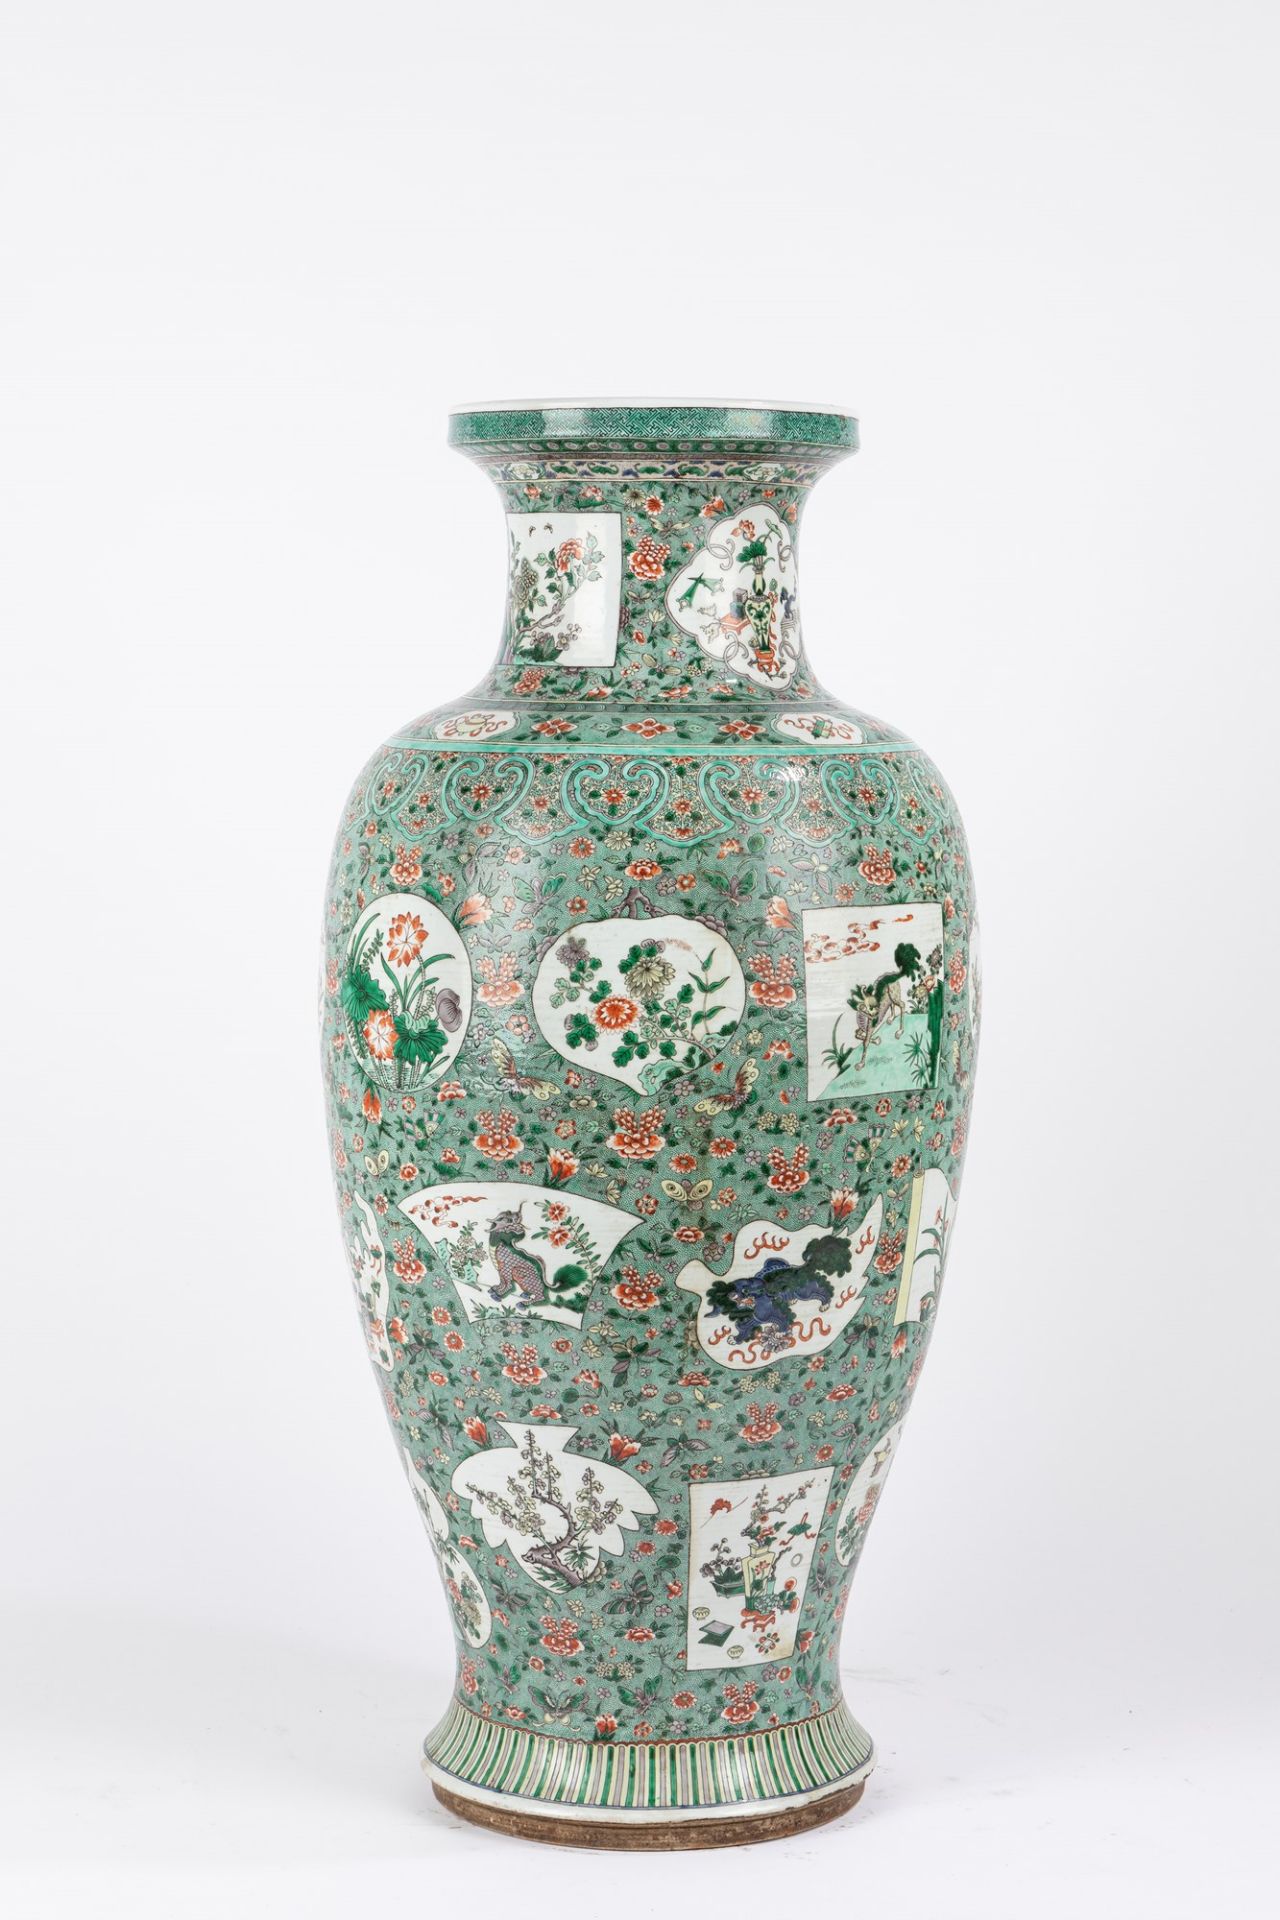 A large Famille Verte baluster vase. China, 19th century (defects) - Image 2 of 3